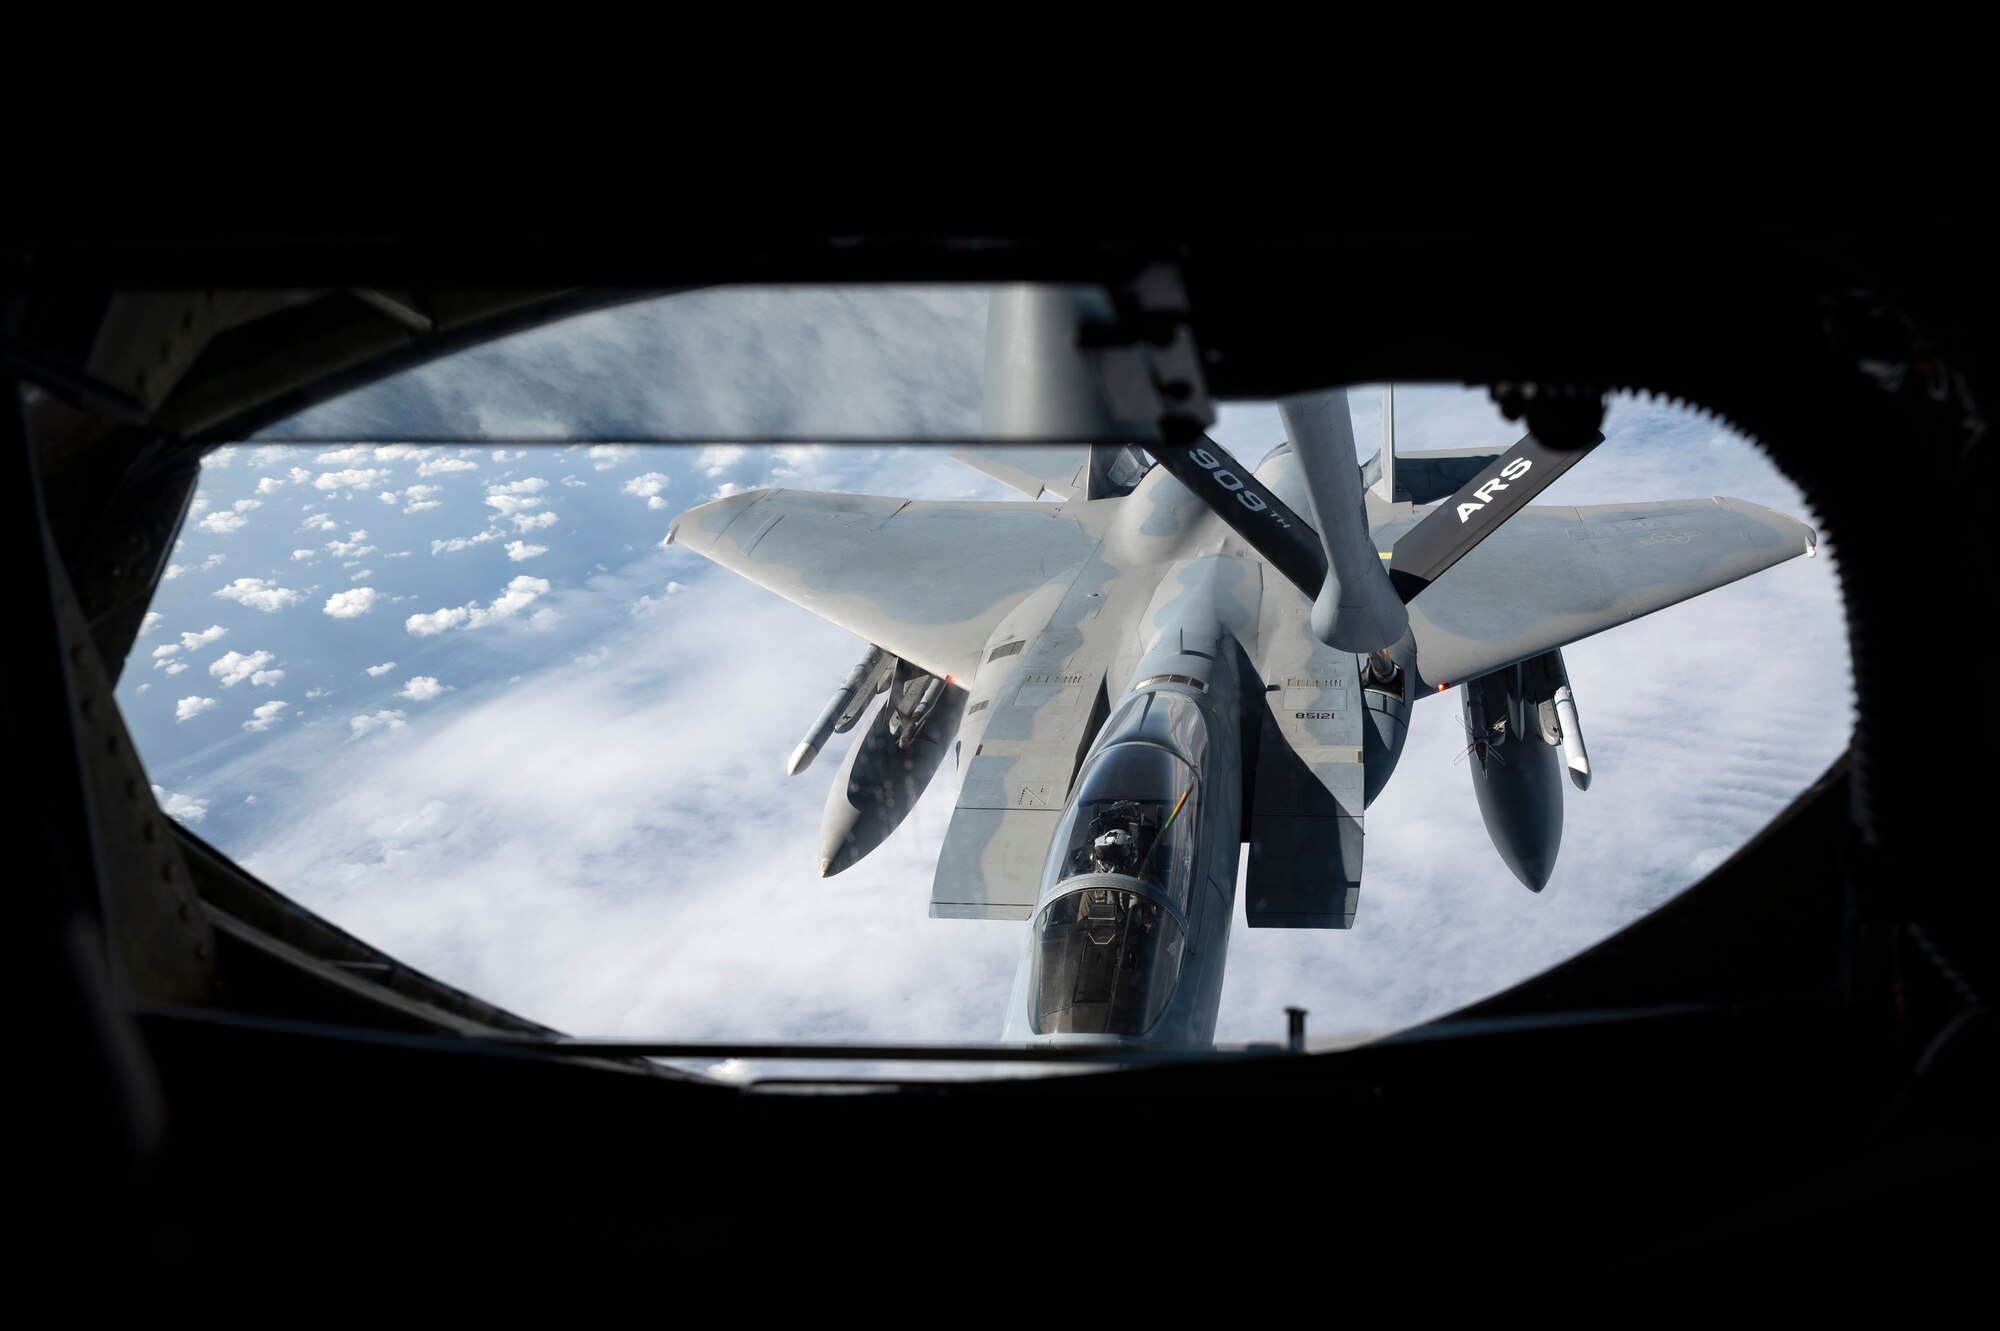 A 44th Fighter Squadron F-15C Eagle receives fuel from a 909th Air Refueling Squadron KC-135 Stratotanker during a flight over the Pacific Ocean in support of exercise Keen Sword 23, Nov. 17, 2022. Bilateral exercises allow U.S. military and Japan Self-Defense Forces to work together across a variety of areas to enhance interoperability and readiness. (U.S. Air Force photo by Senior Airman Jessi Roth)